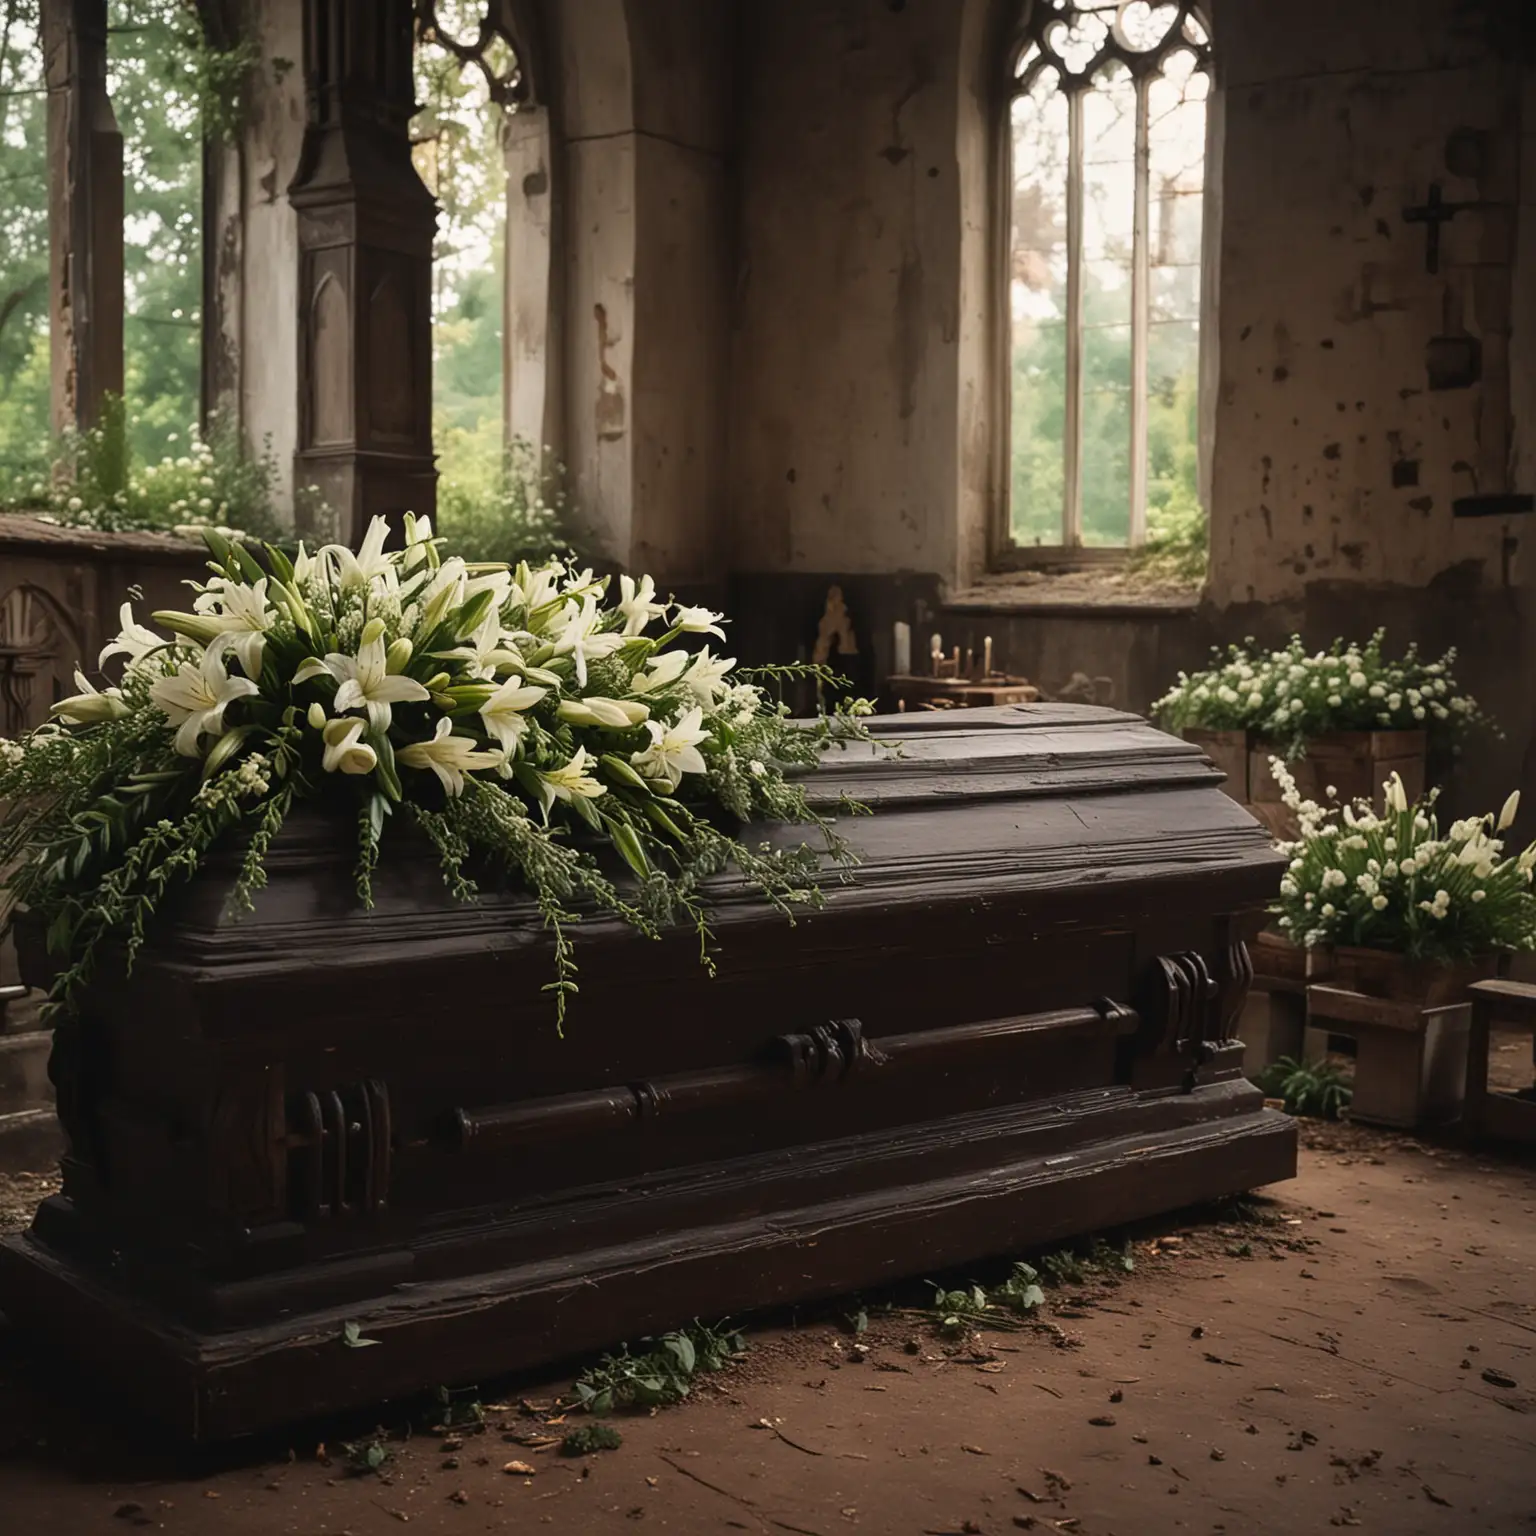 Dark Beautiful Coffin with Lilies in Old Church Setting